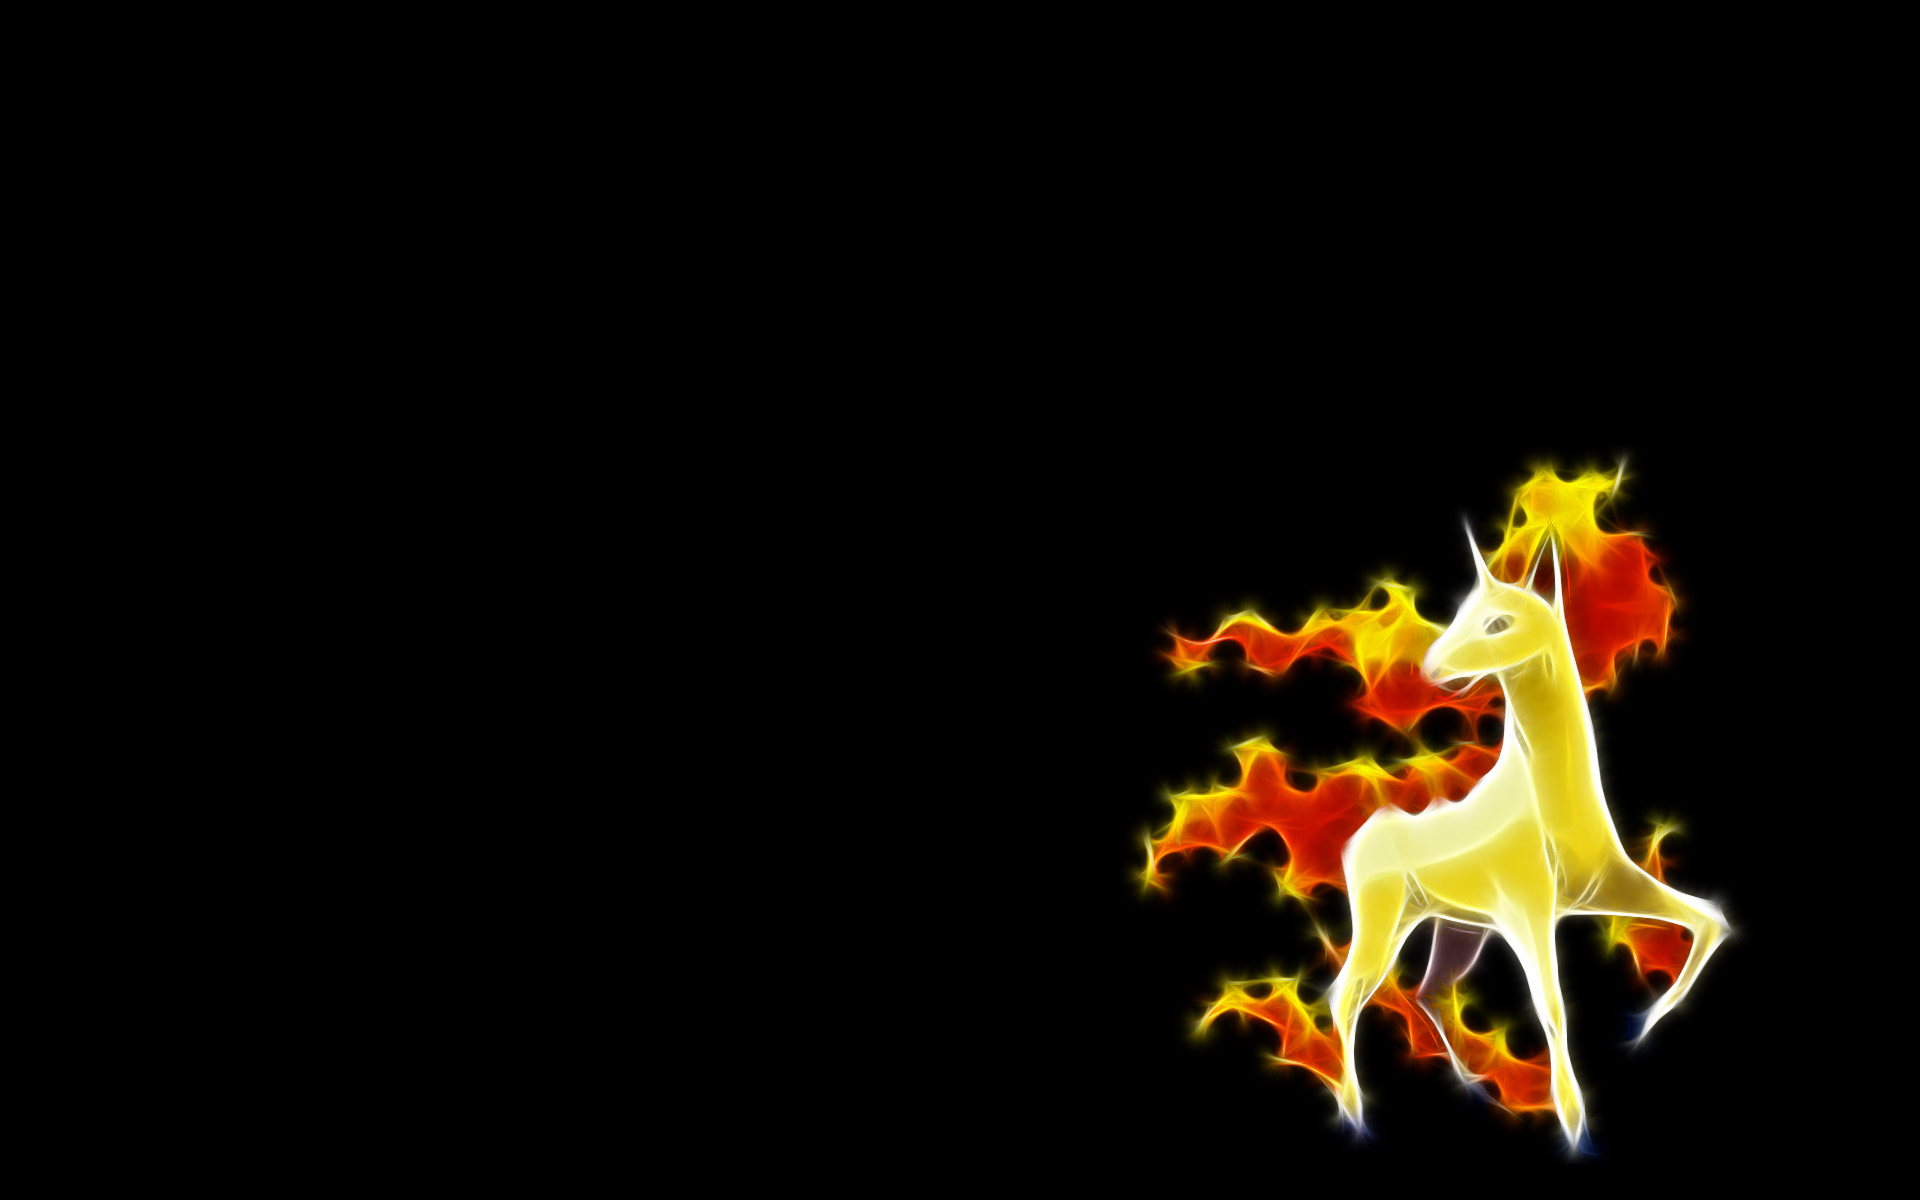 A majestic fire Pokémon, Rapidash, from the Pokémon franchise, galloping in an anime-style setting.